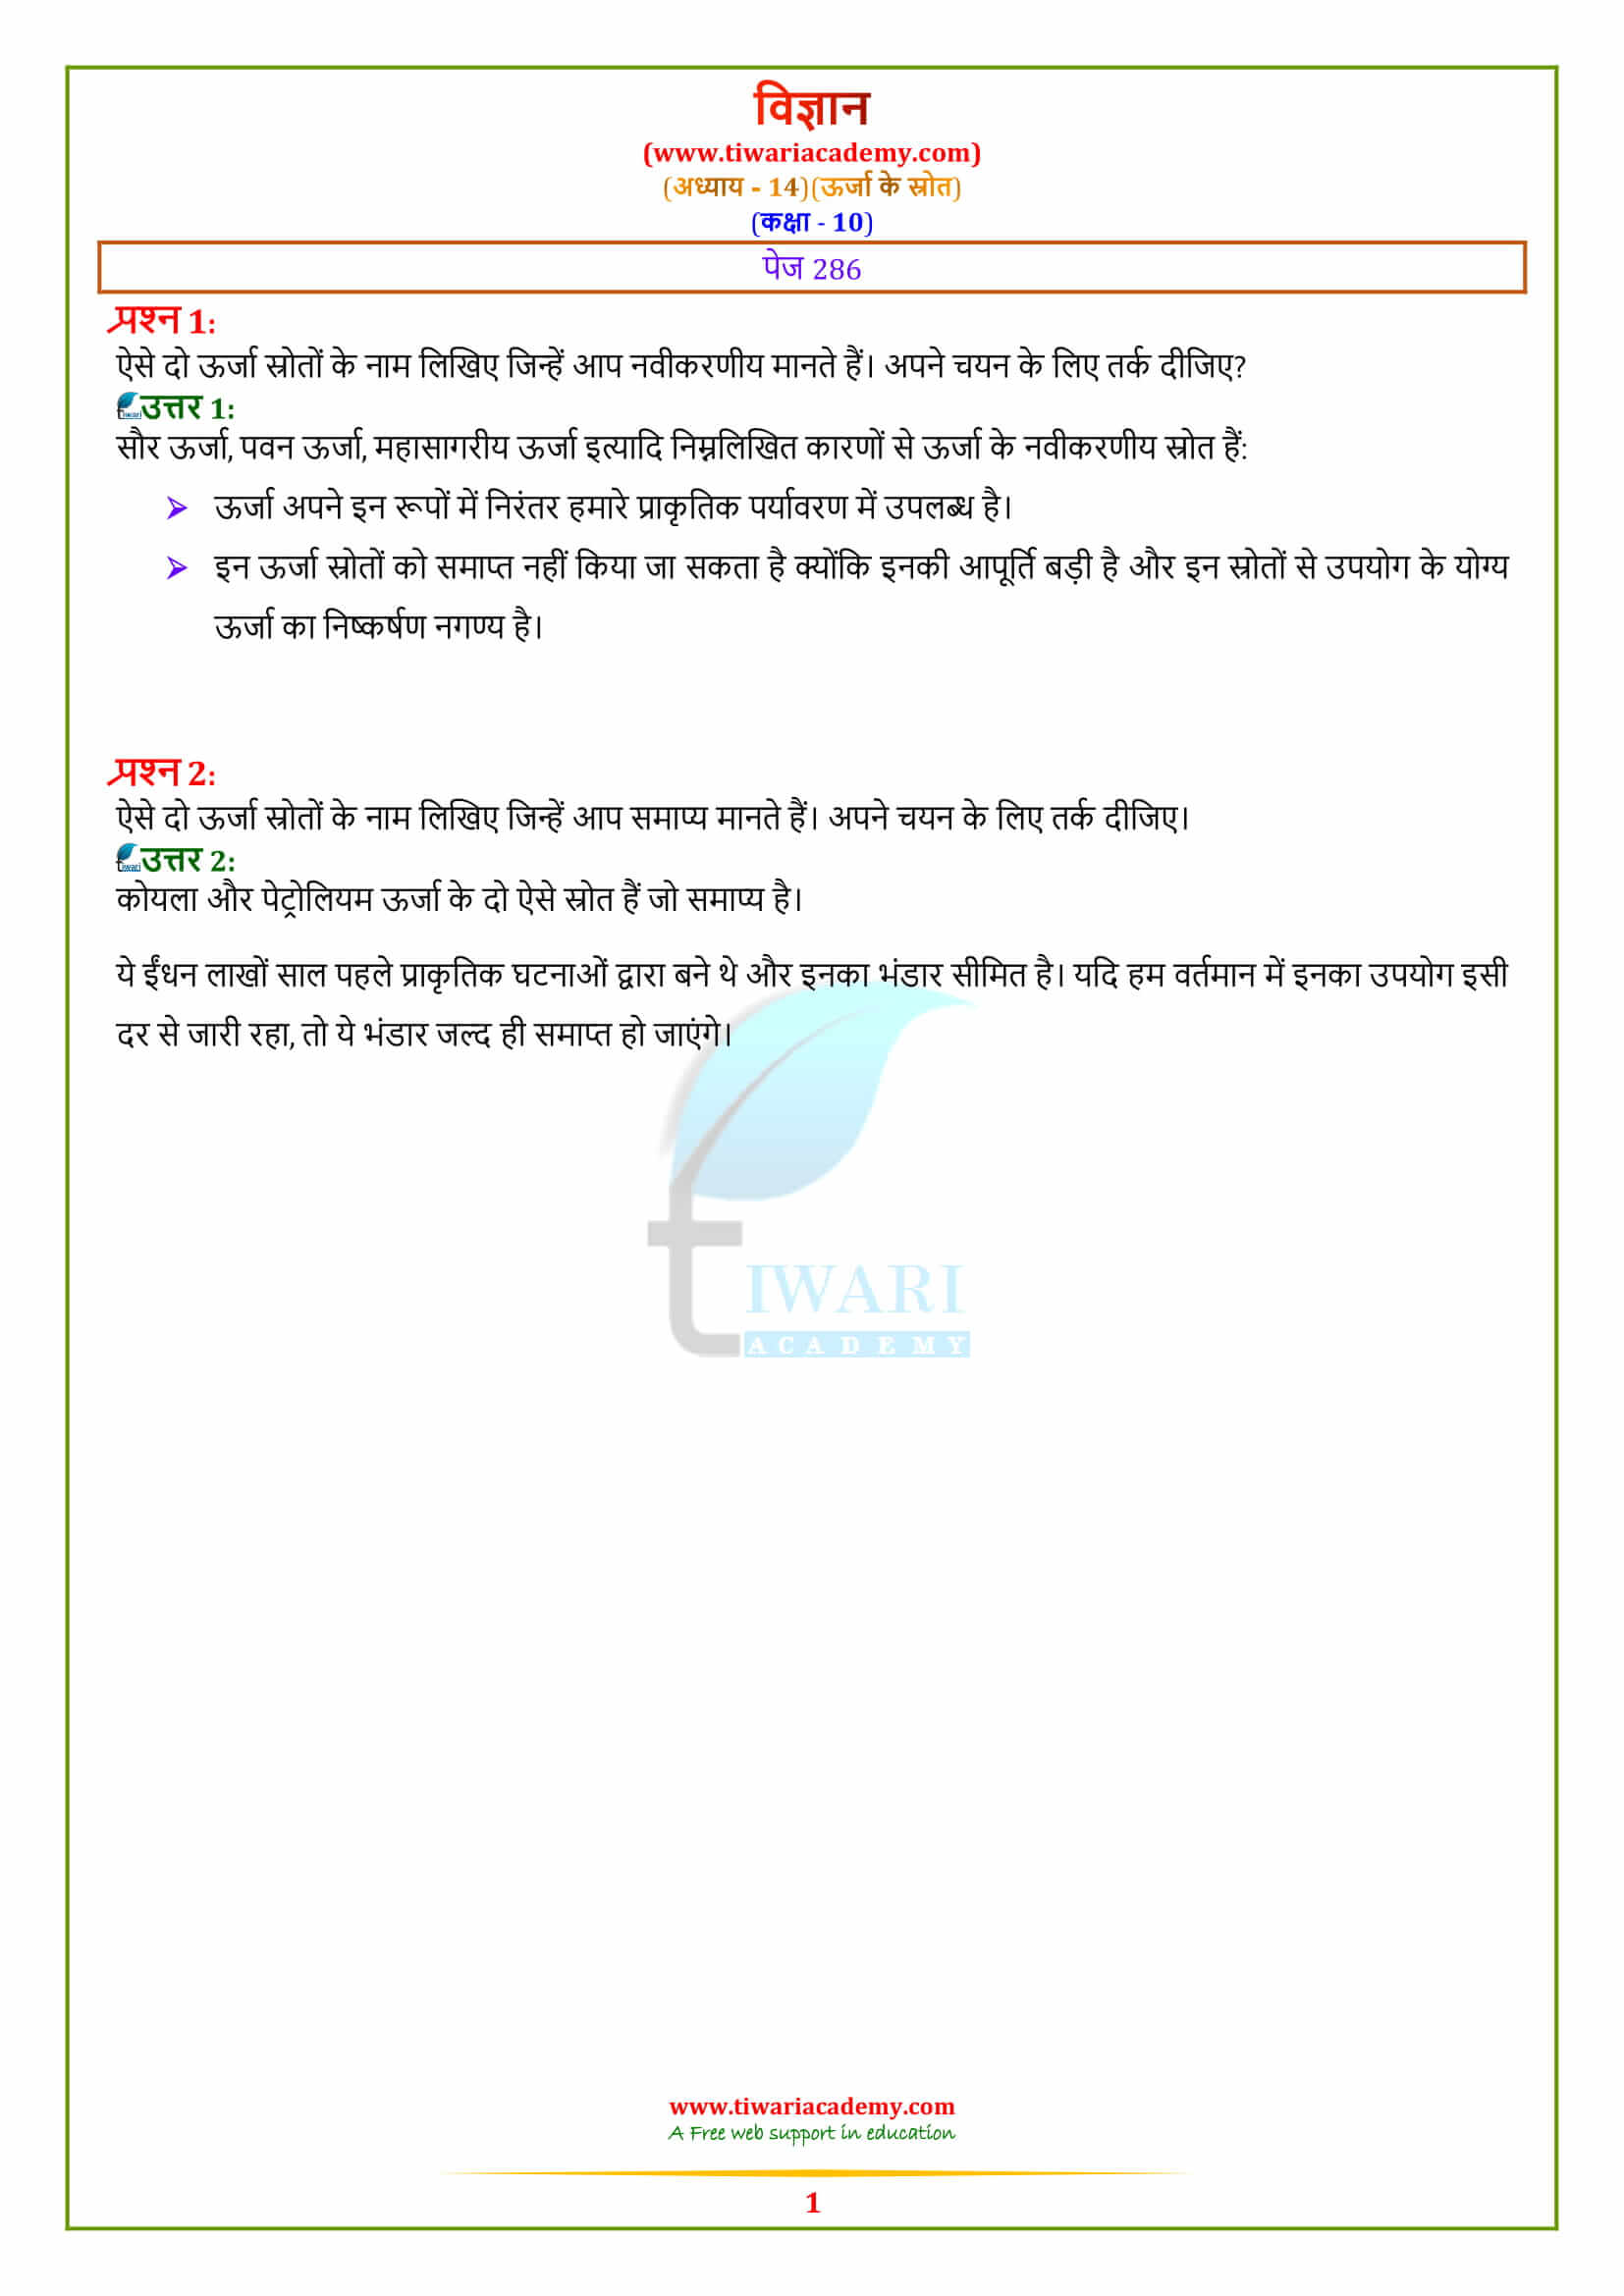 Solutions for Class 10 Science Chapter 14 पेज 286 के उत्तर